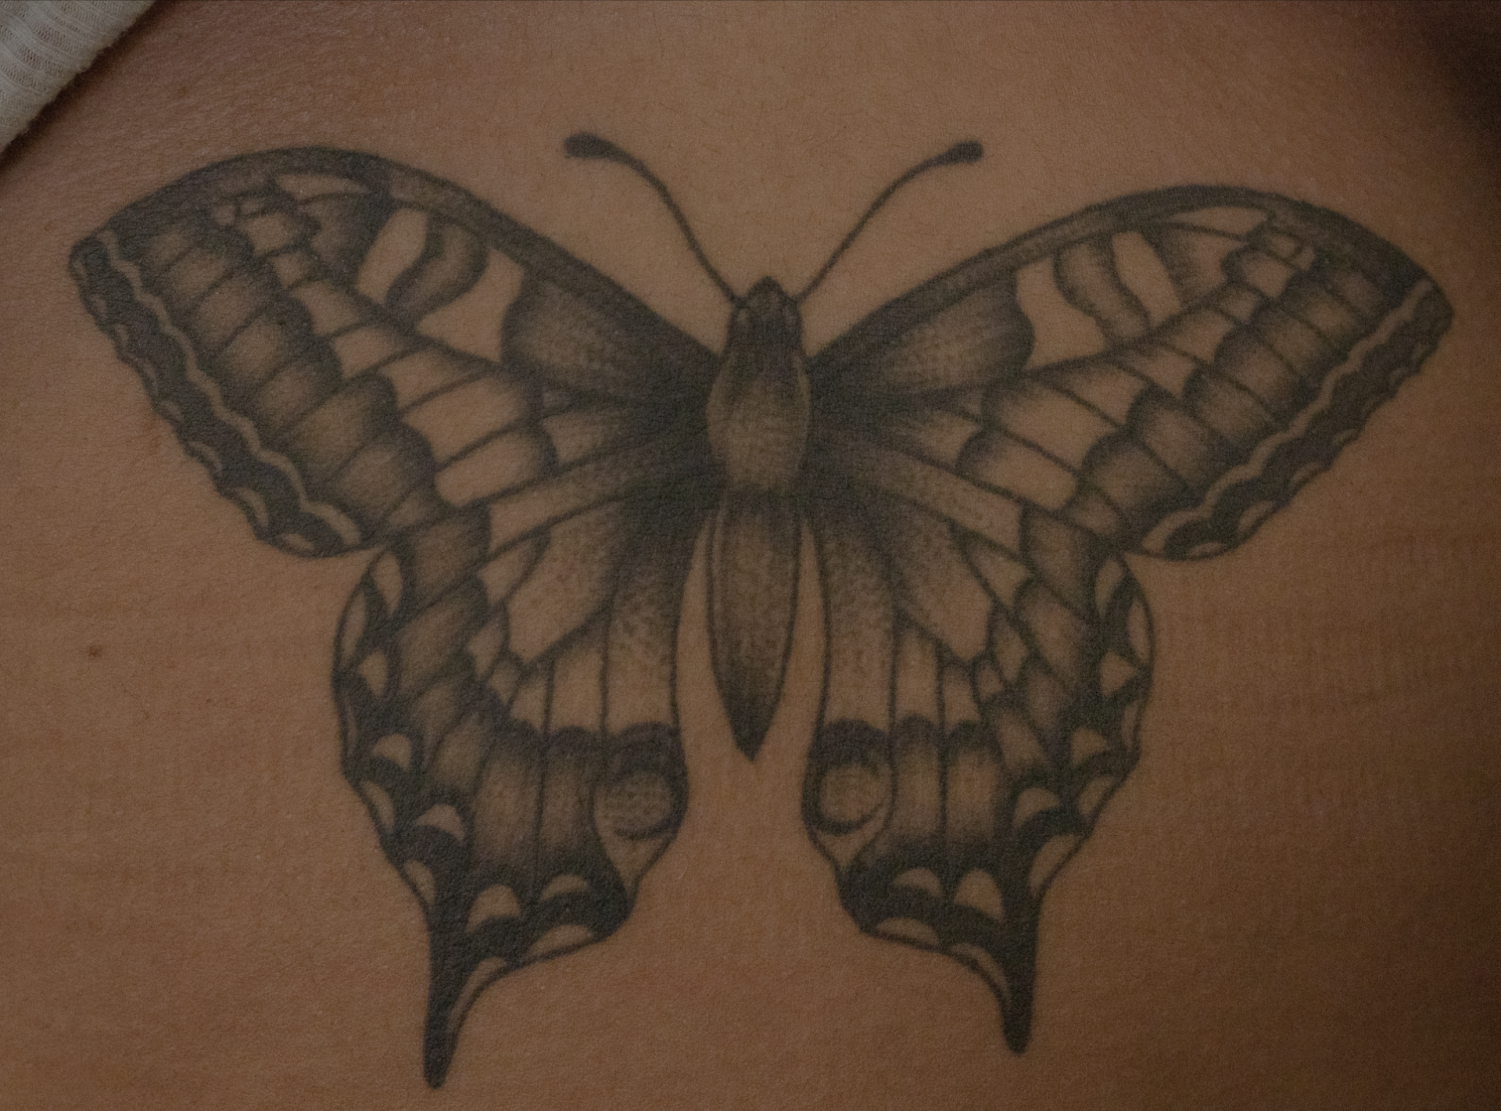 This+popular%2C+hyper-realistic%2C+thin+linework+style+of+a+buttterfly%2C+located+on+Rojas+abdomen+contains+a+variety+of+shading+techniques.